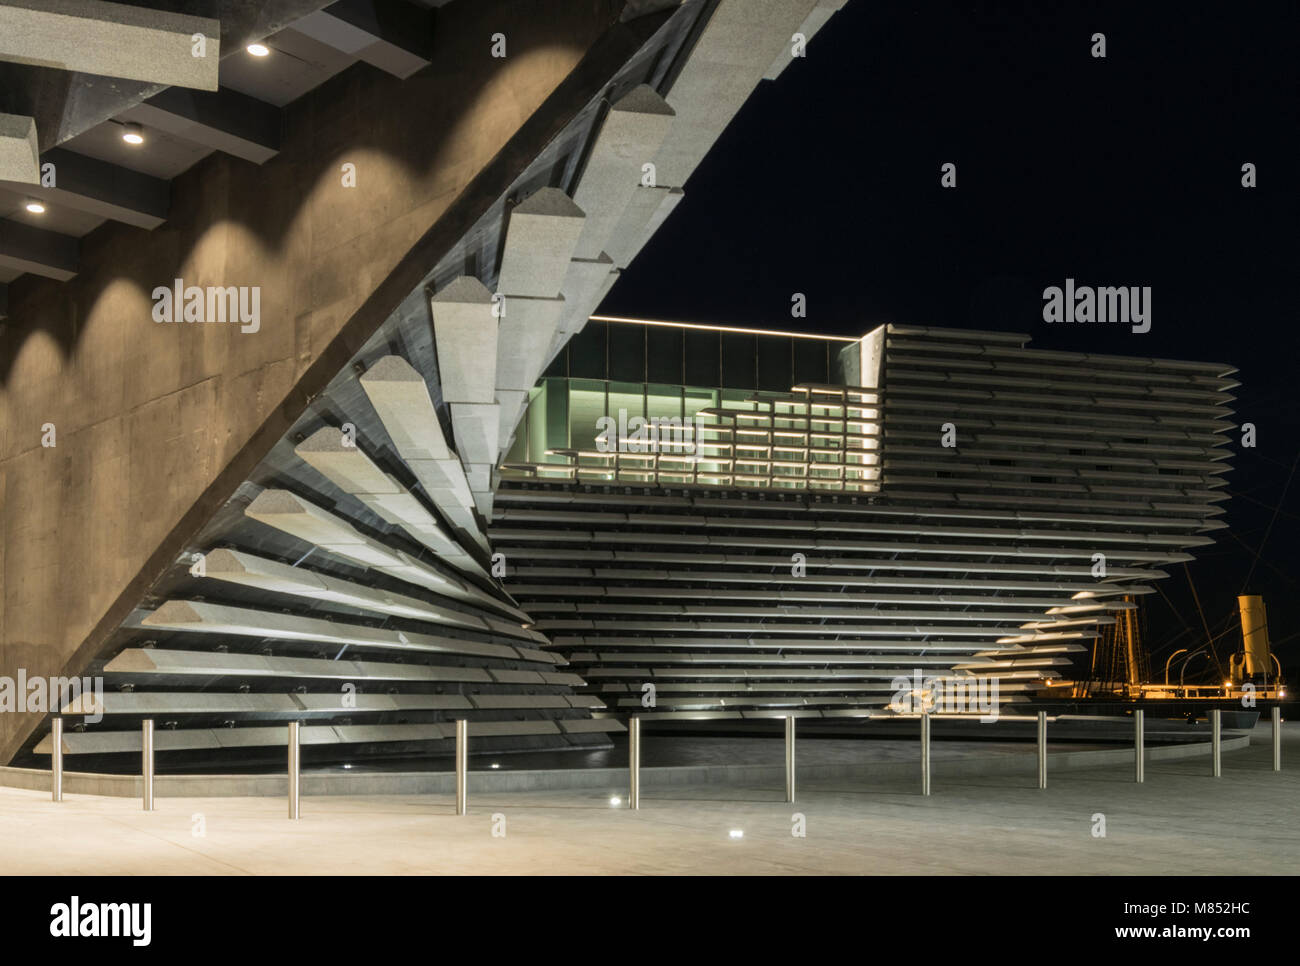 The V&A design museum in Dundee is a signature building by world famous Japanese architect Kengo Kuma. Stock Photo